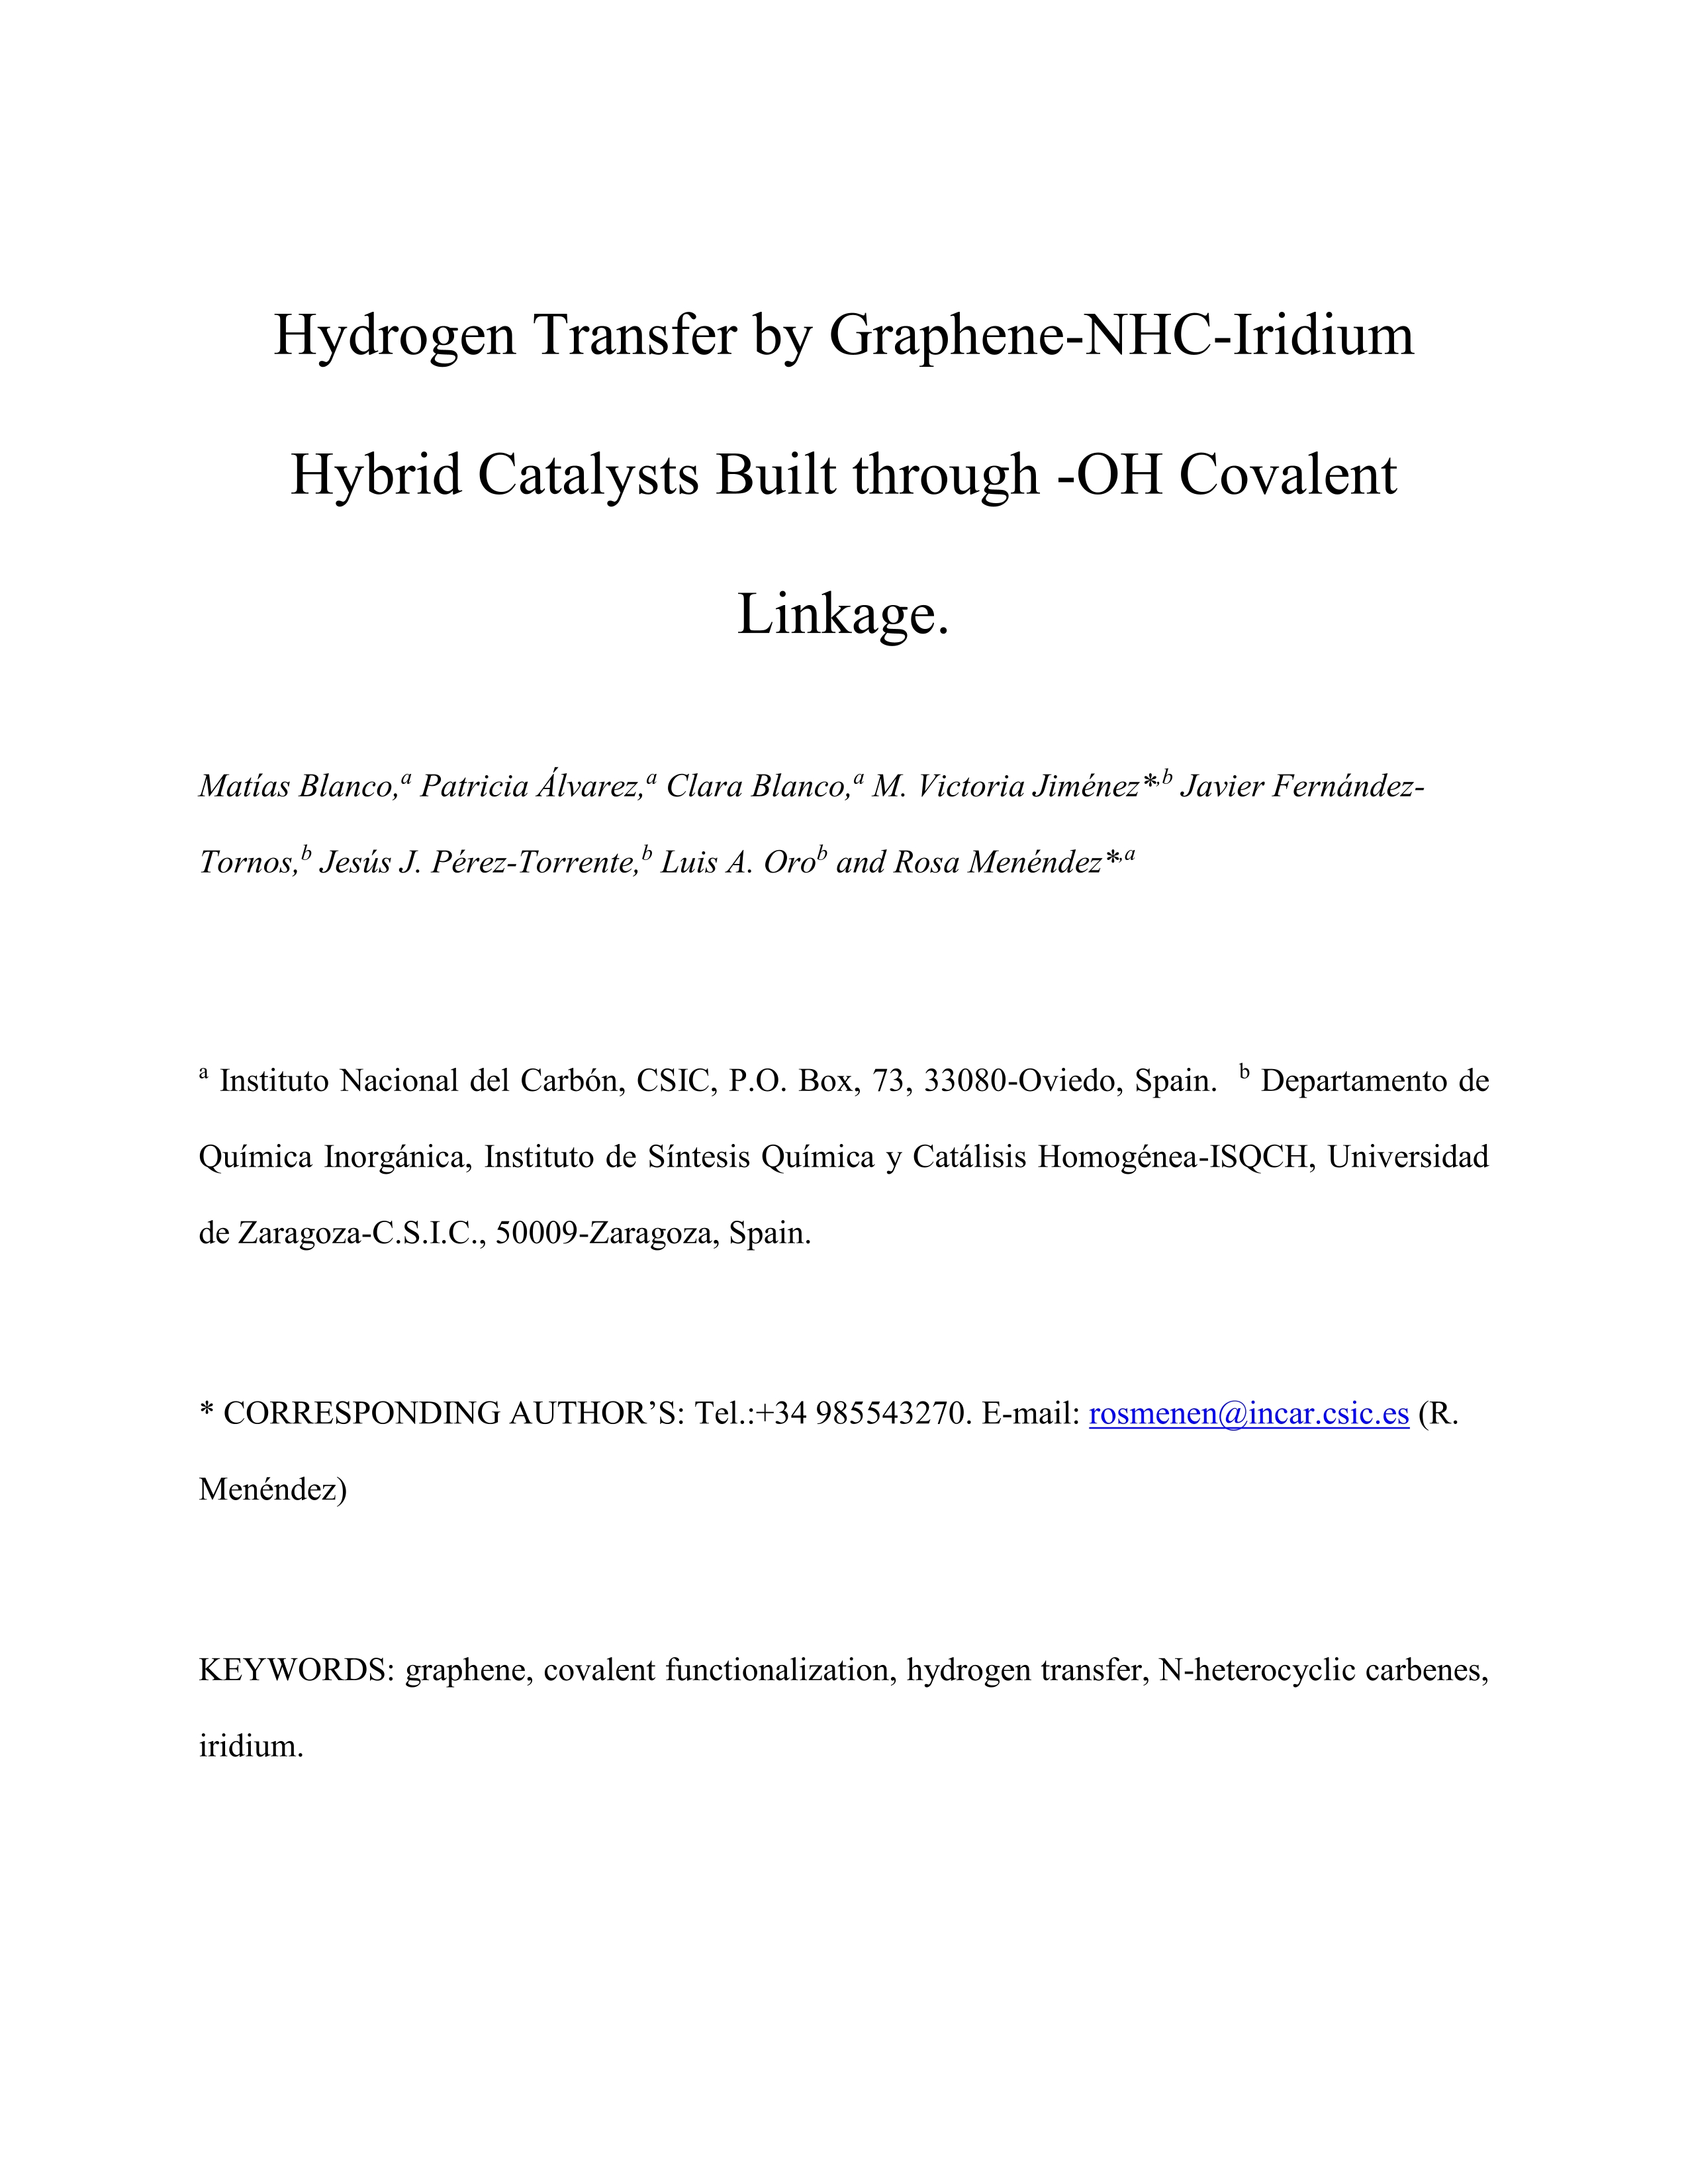 Graphene-NHC-iridium hybrid catalysts built through -OH covalent linkage Dedicated to the lasting Memory of Prof. Dr. María Pilar García for her valuable talent as human, teacher and chemist